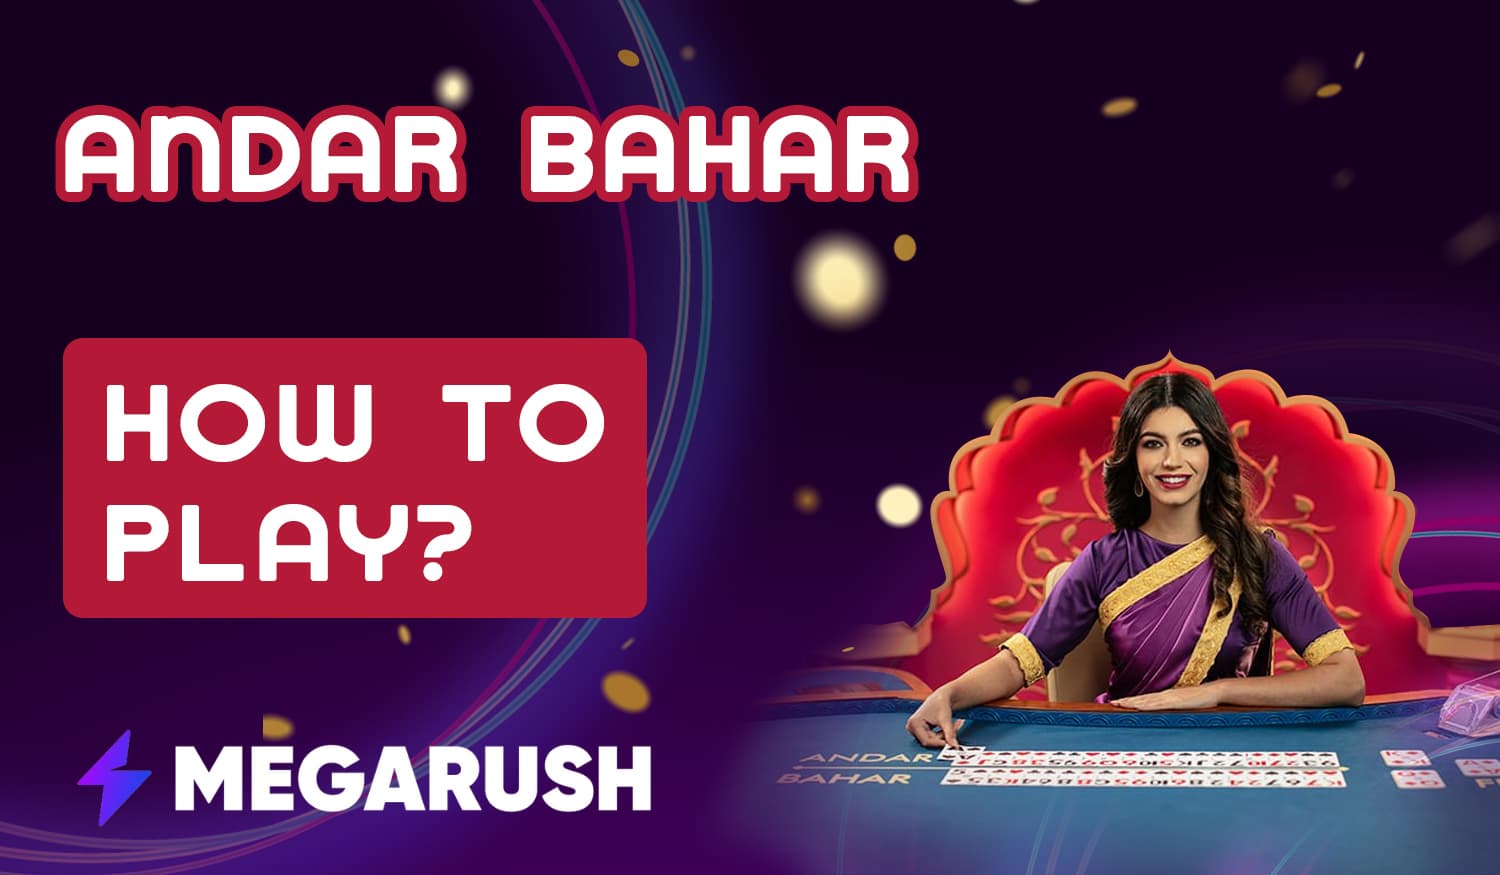 Detailed instructions for new users of Megarush casino how to start playing Andar Bahar